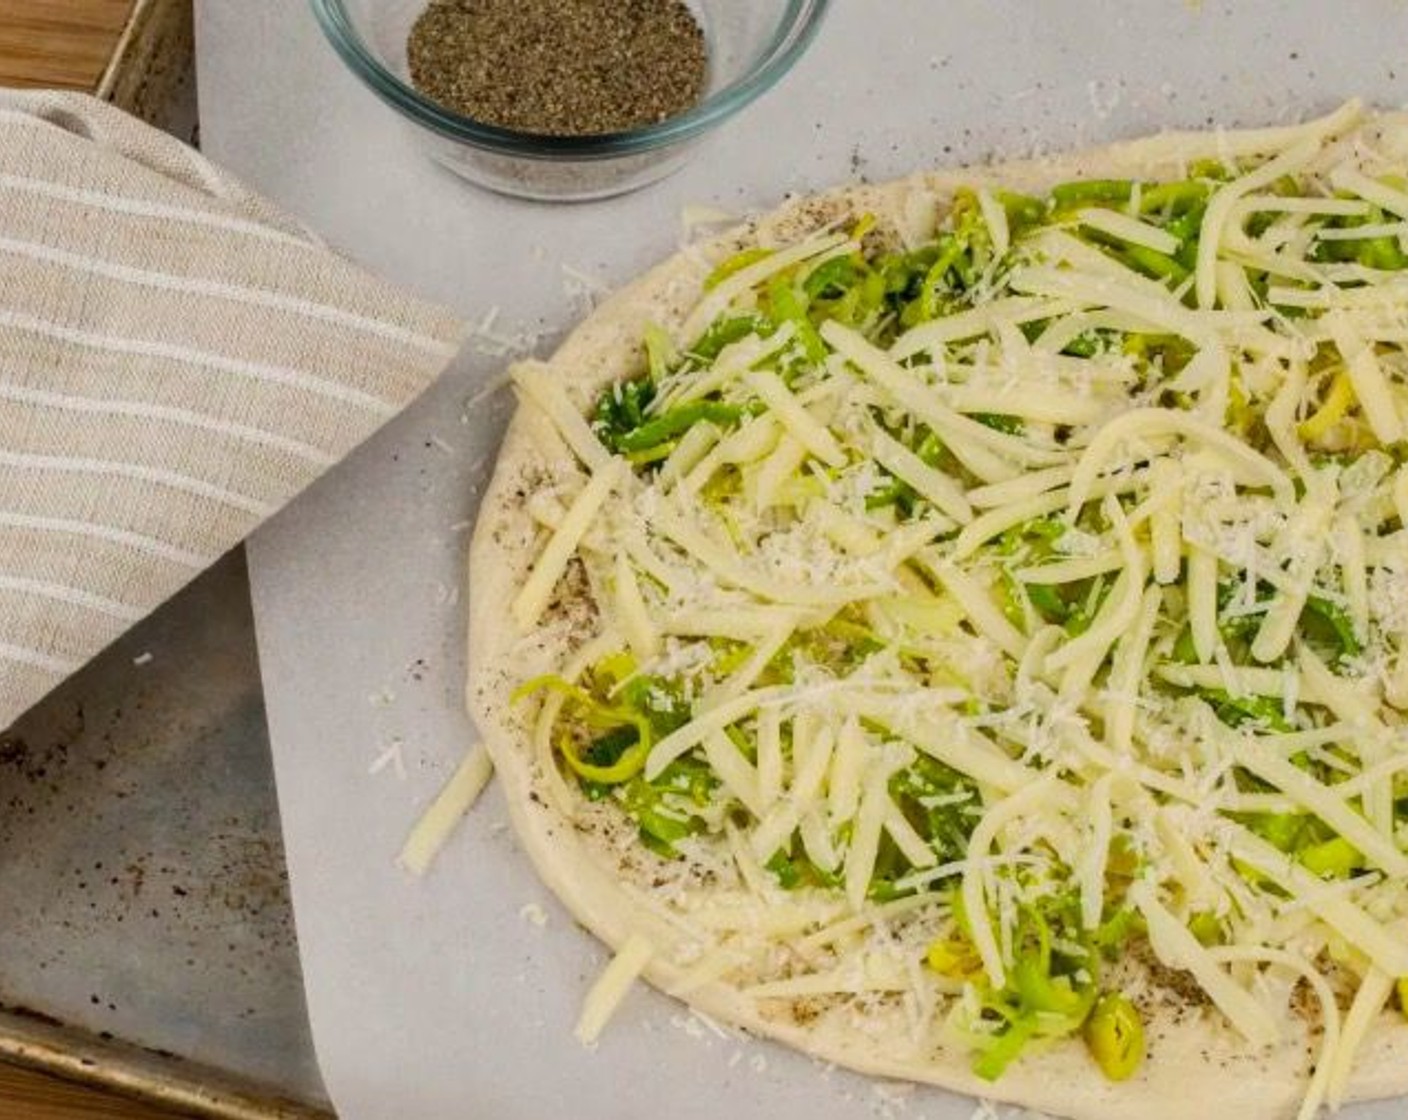 step 10 Sprinkle a quarter of the Shredded Mozzarella Cheese (1 1/2 cups) evenly over each dough round and top each with half of the sautéed leeks. Add another quarter of mozzarella cheese and half of the Parmesan Cheese (1/4 cup) to each dough round. Season both rounds with additional salt.